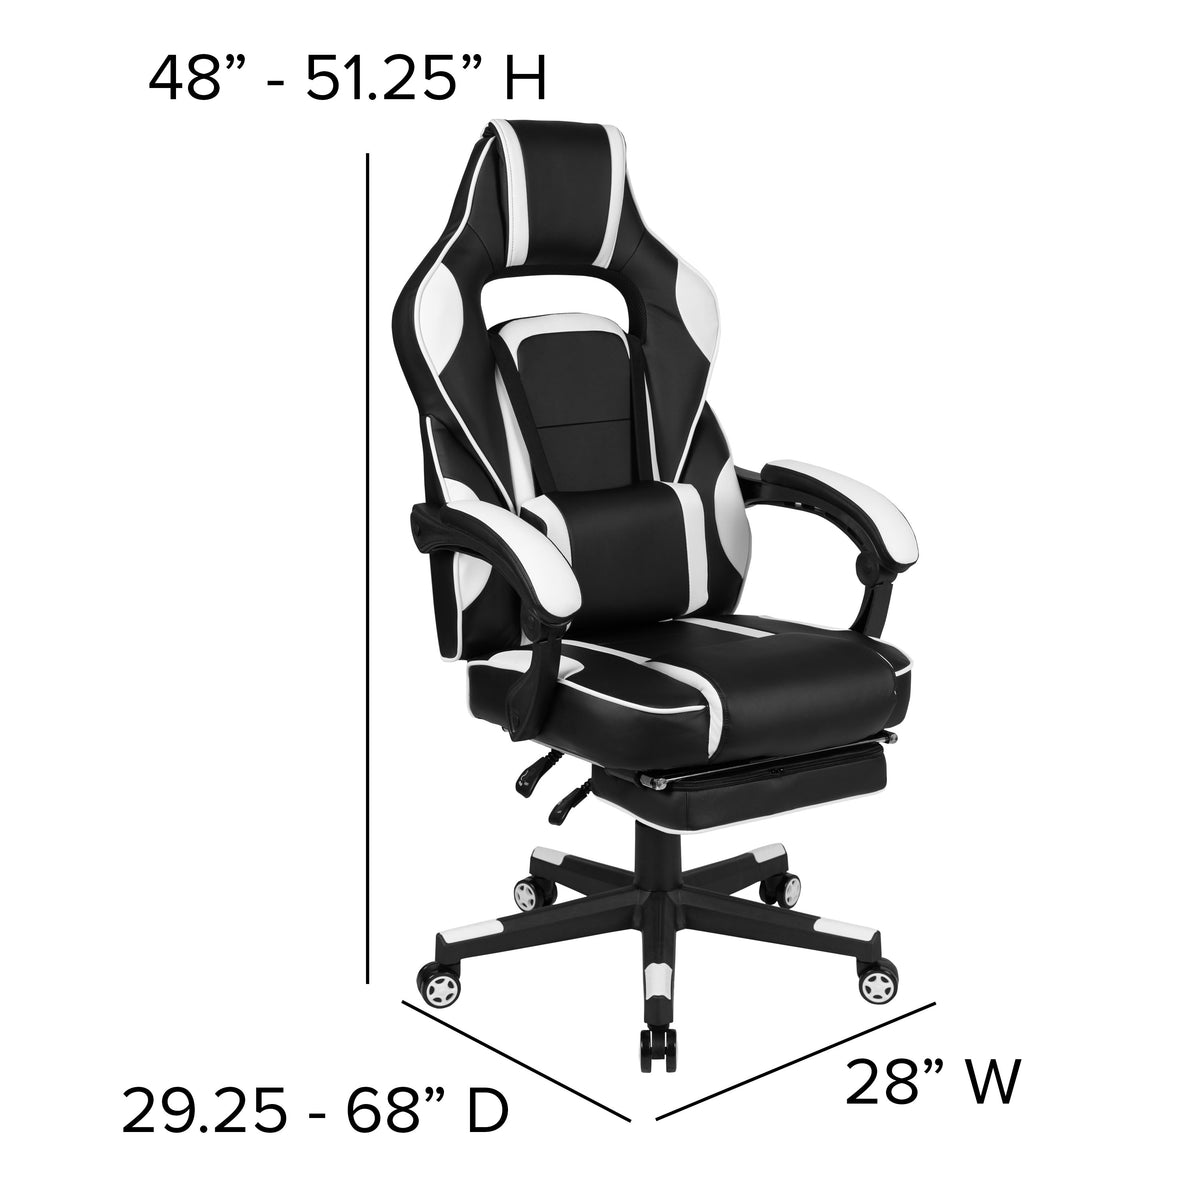 White |#| Gaming Bundle-Cup/Headphone Desk & White Reclining Footrest Chair